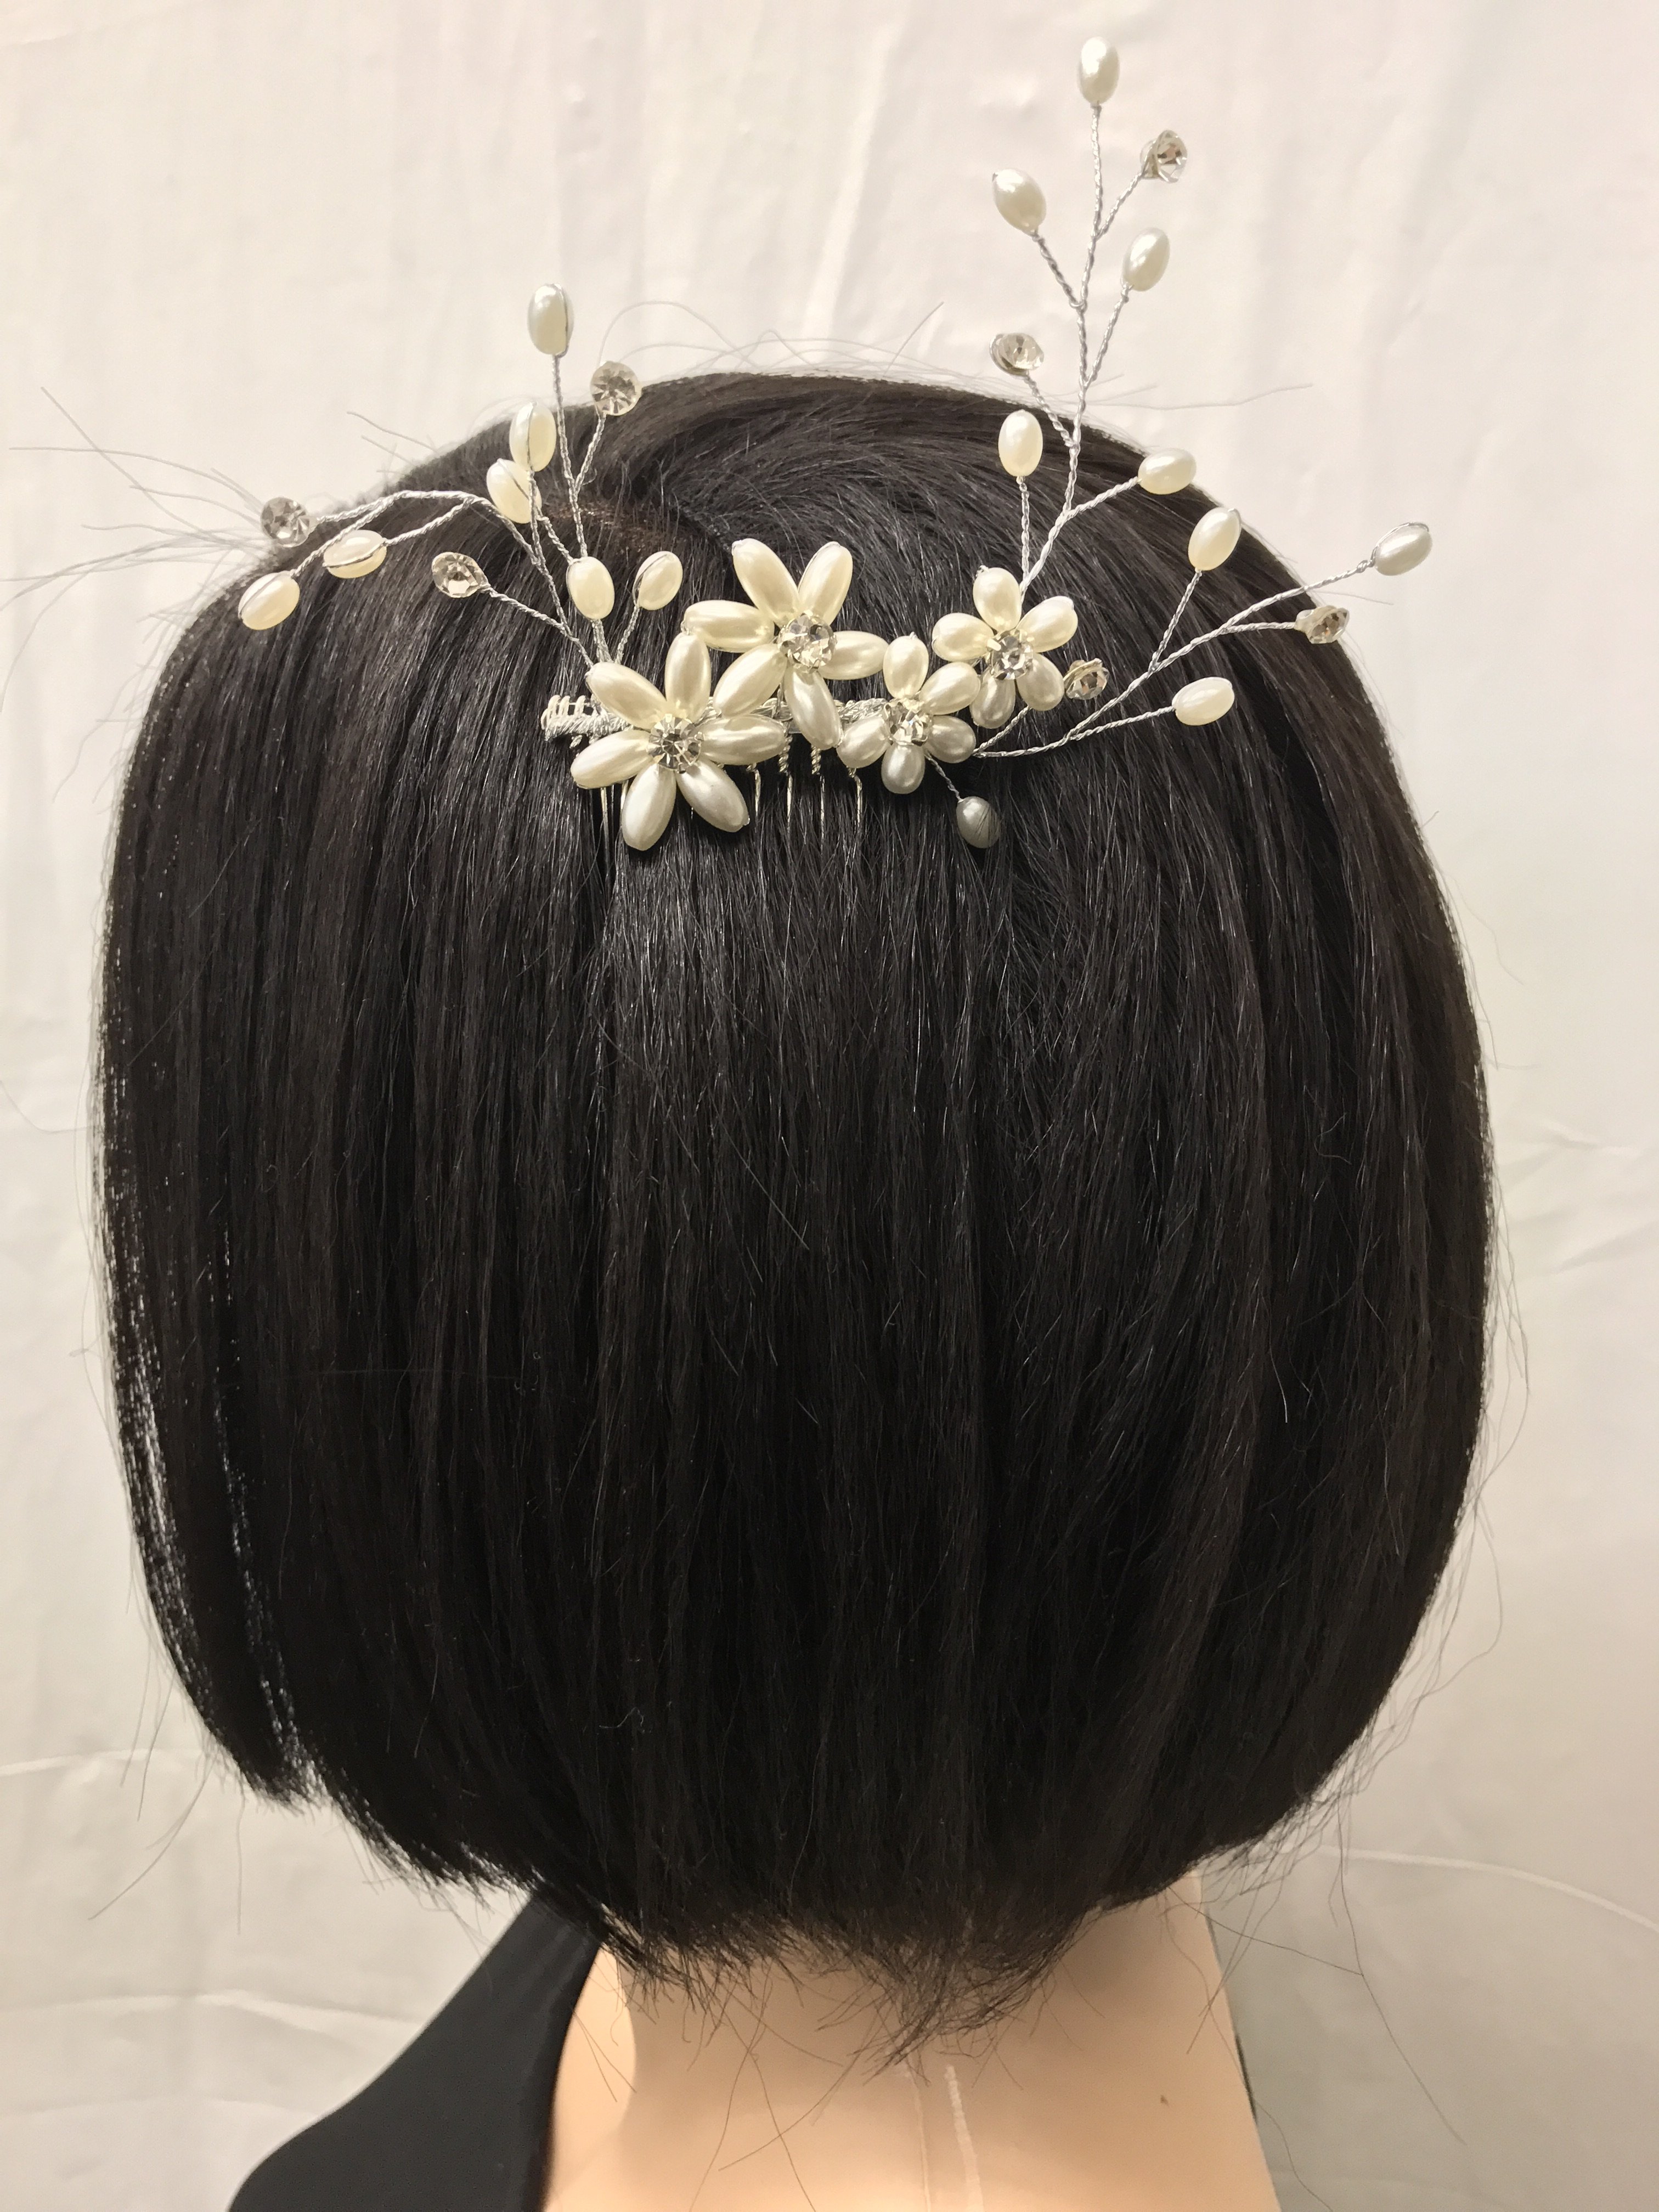 Silver Metal Hair Comb With Branches Of Pearls & Rhinestone Accents